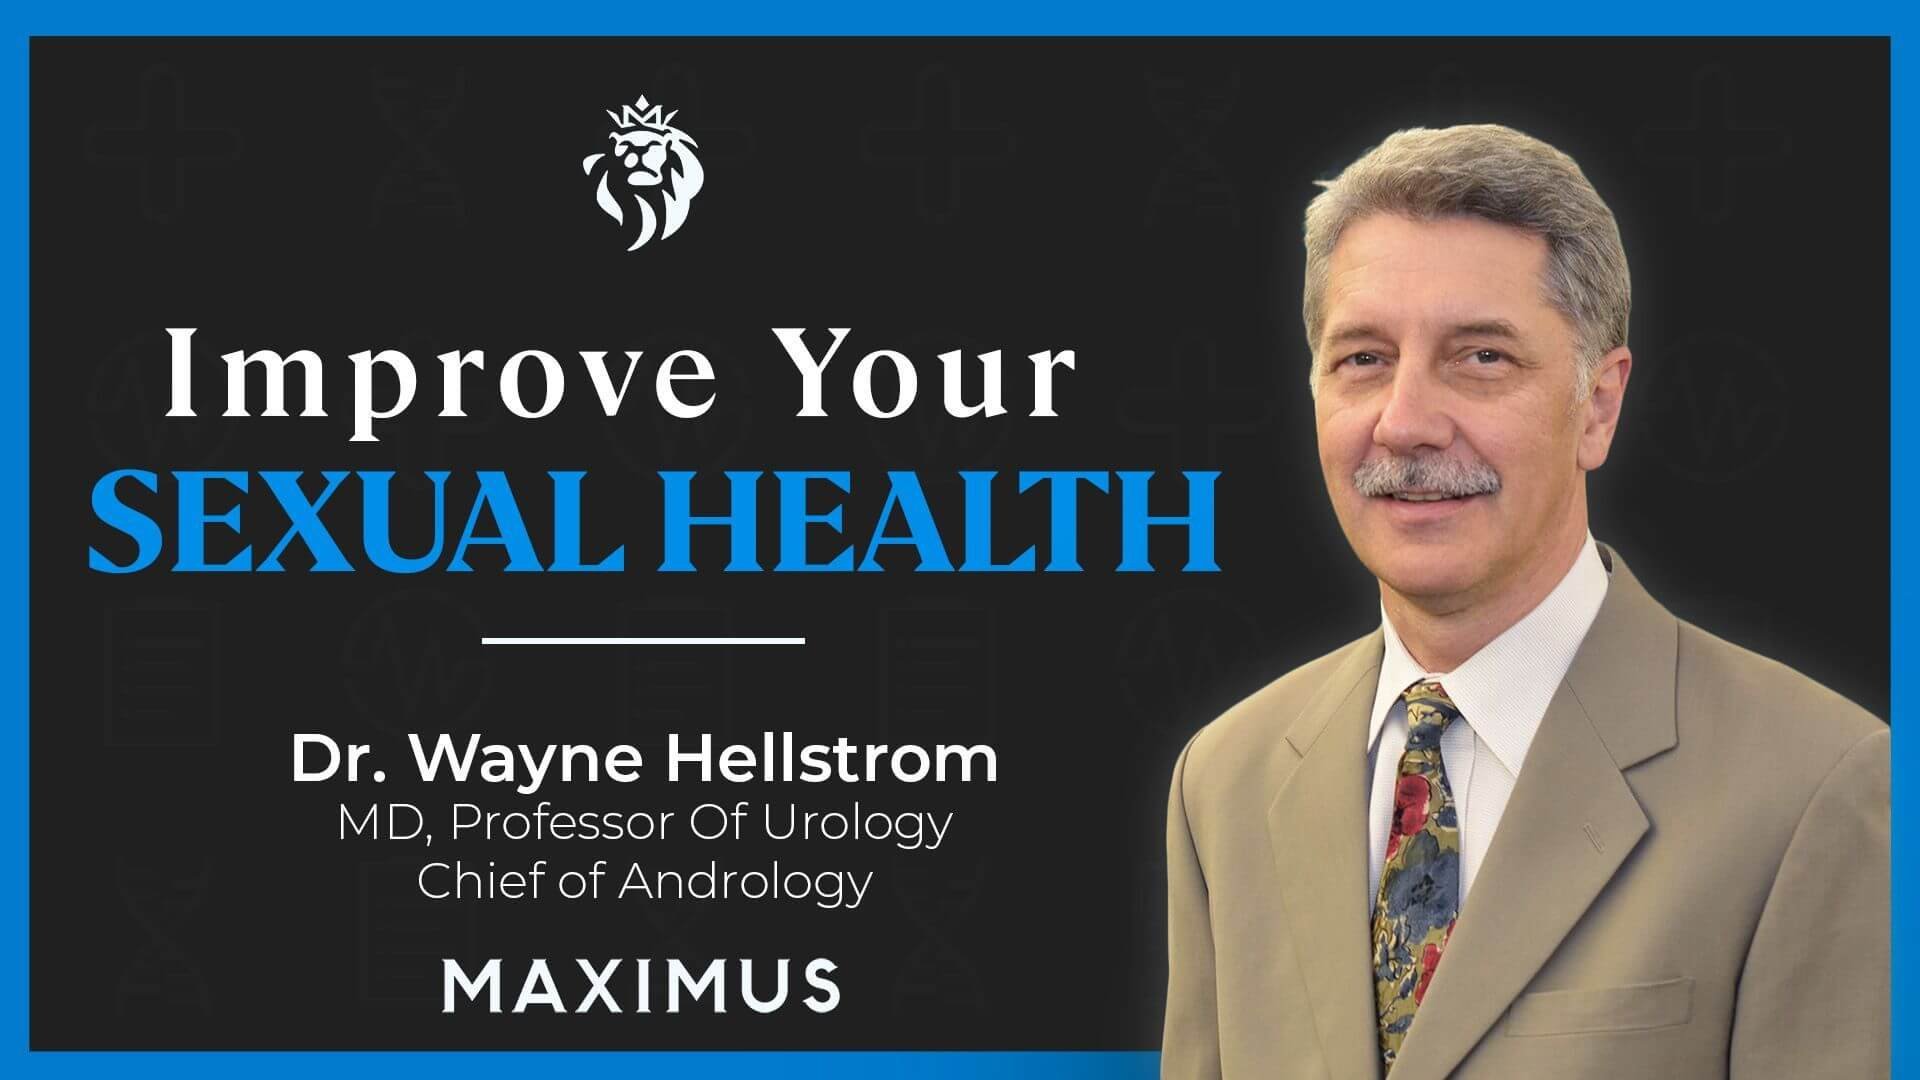 Sexual Health and Performance | Dr. Wayne Hellstrom